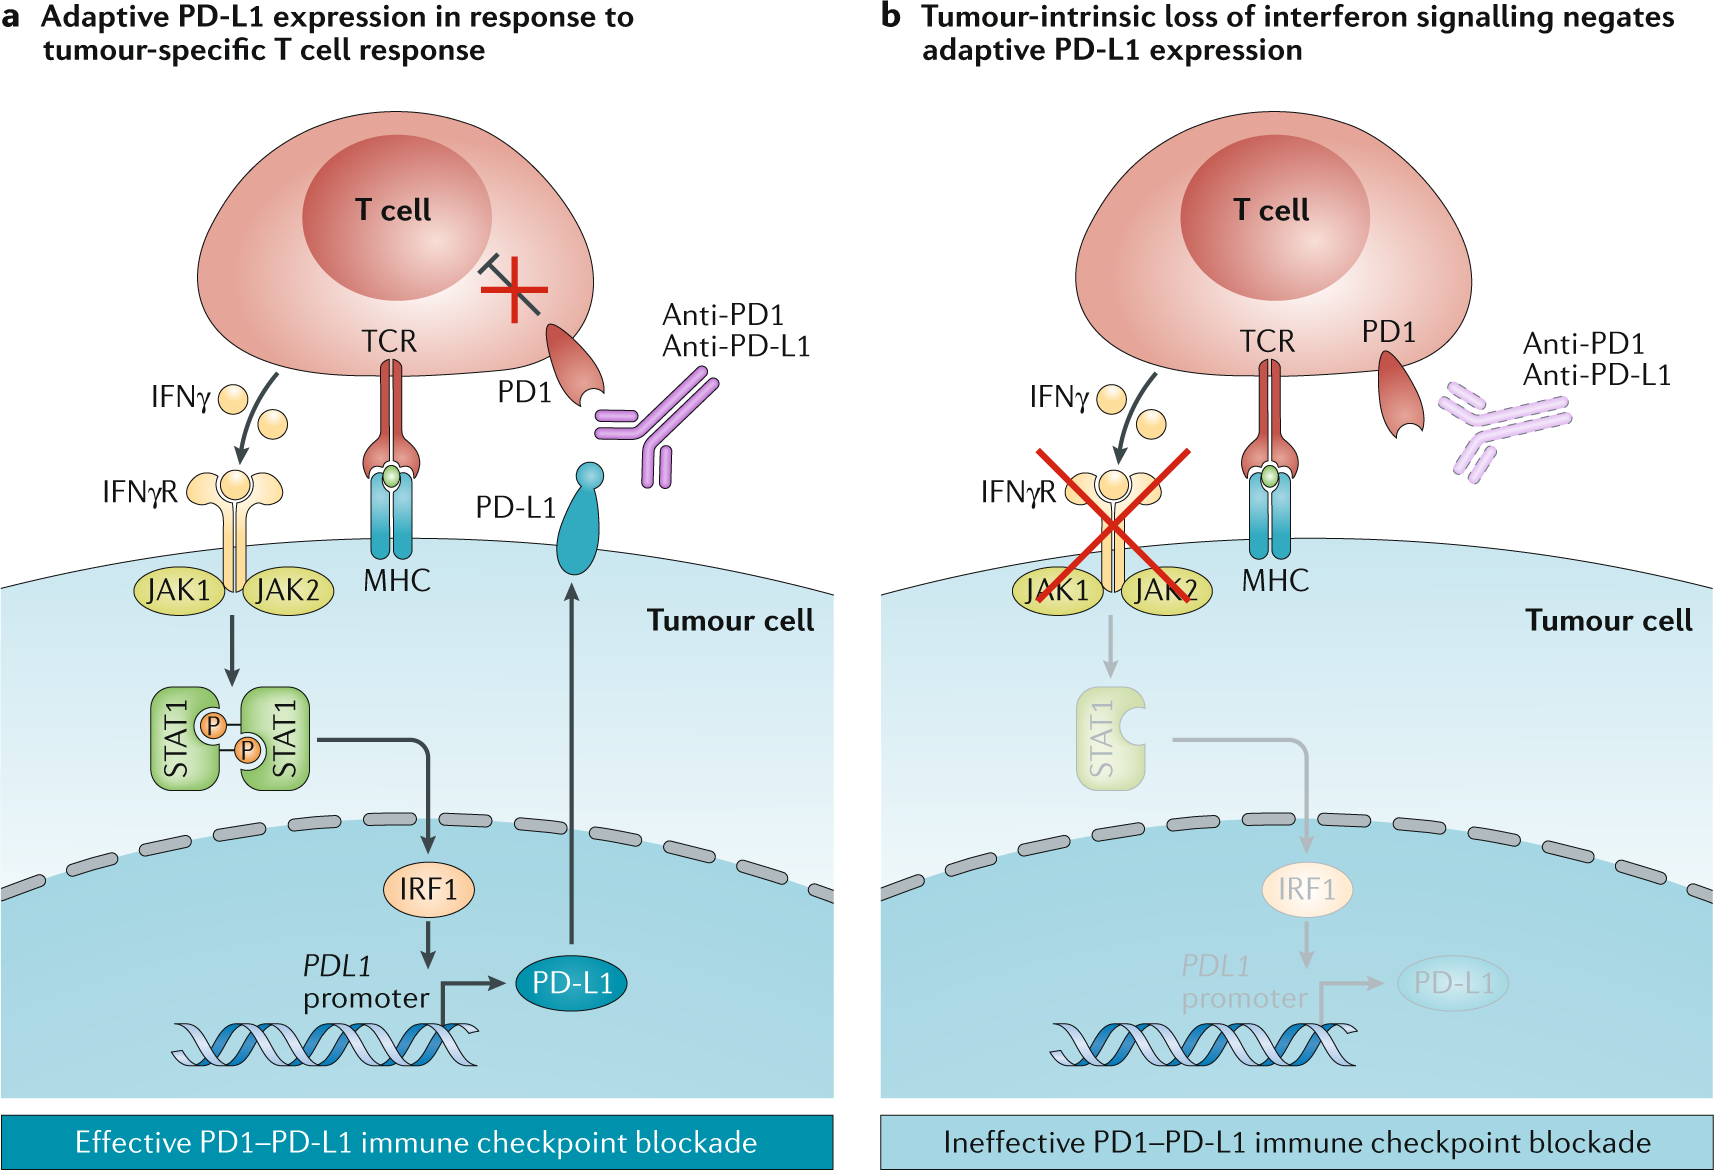 Tumour-intrinsic resistance to immune checkpoint | Nature Reviews